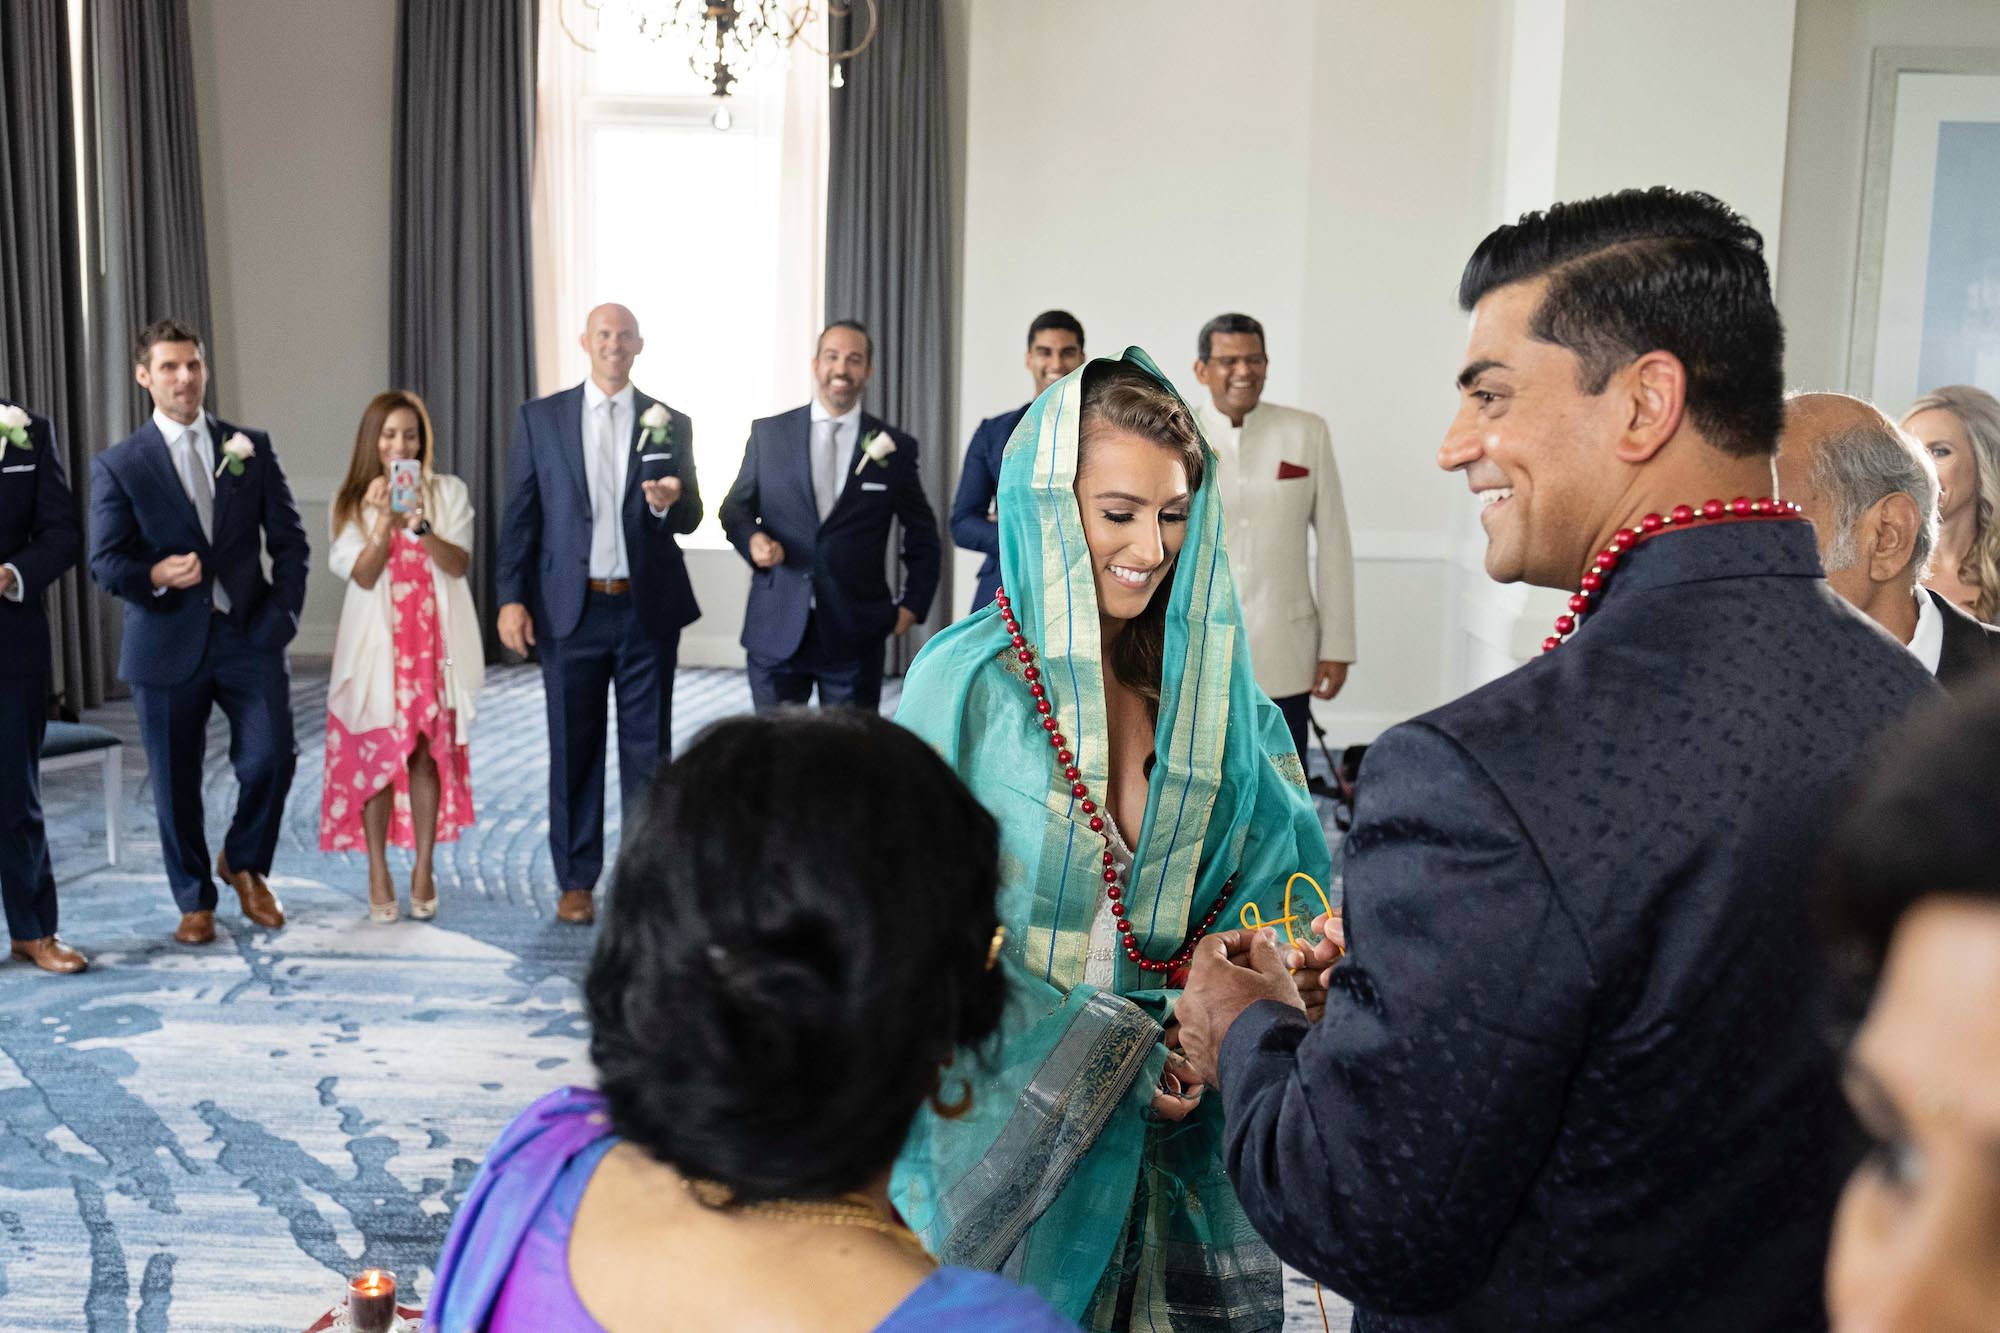 Florida Bride and Groom in Intimate Religious Hindu Wedding Ceremony, Bride Wearing Brightly Colored Teal Sari, Wearing Red Beads, | The Don CeSar Resort in Tampa Bay